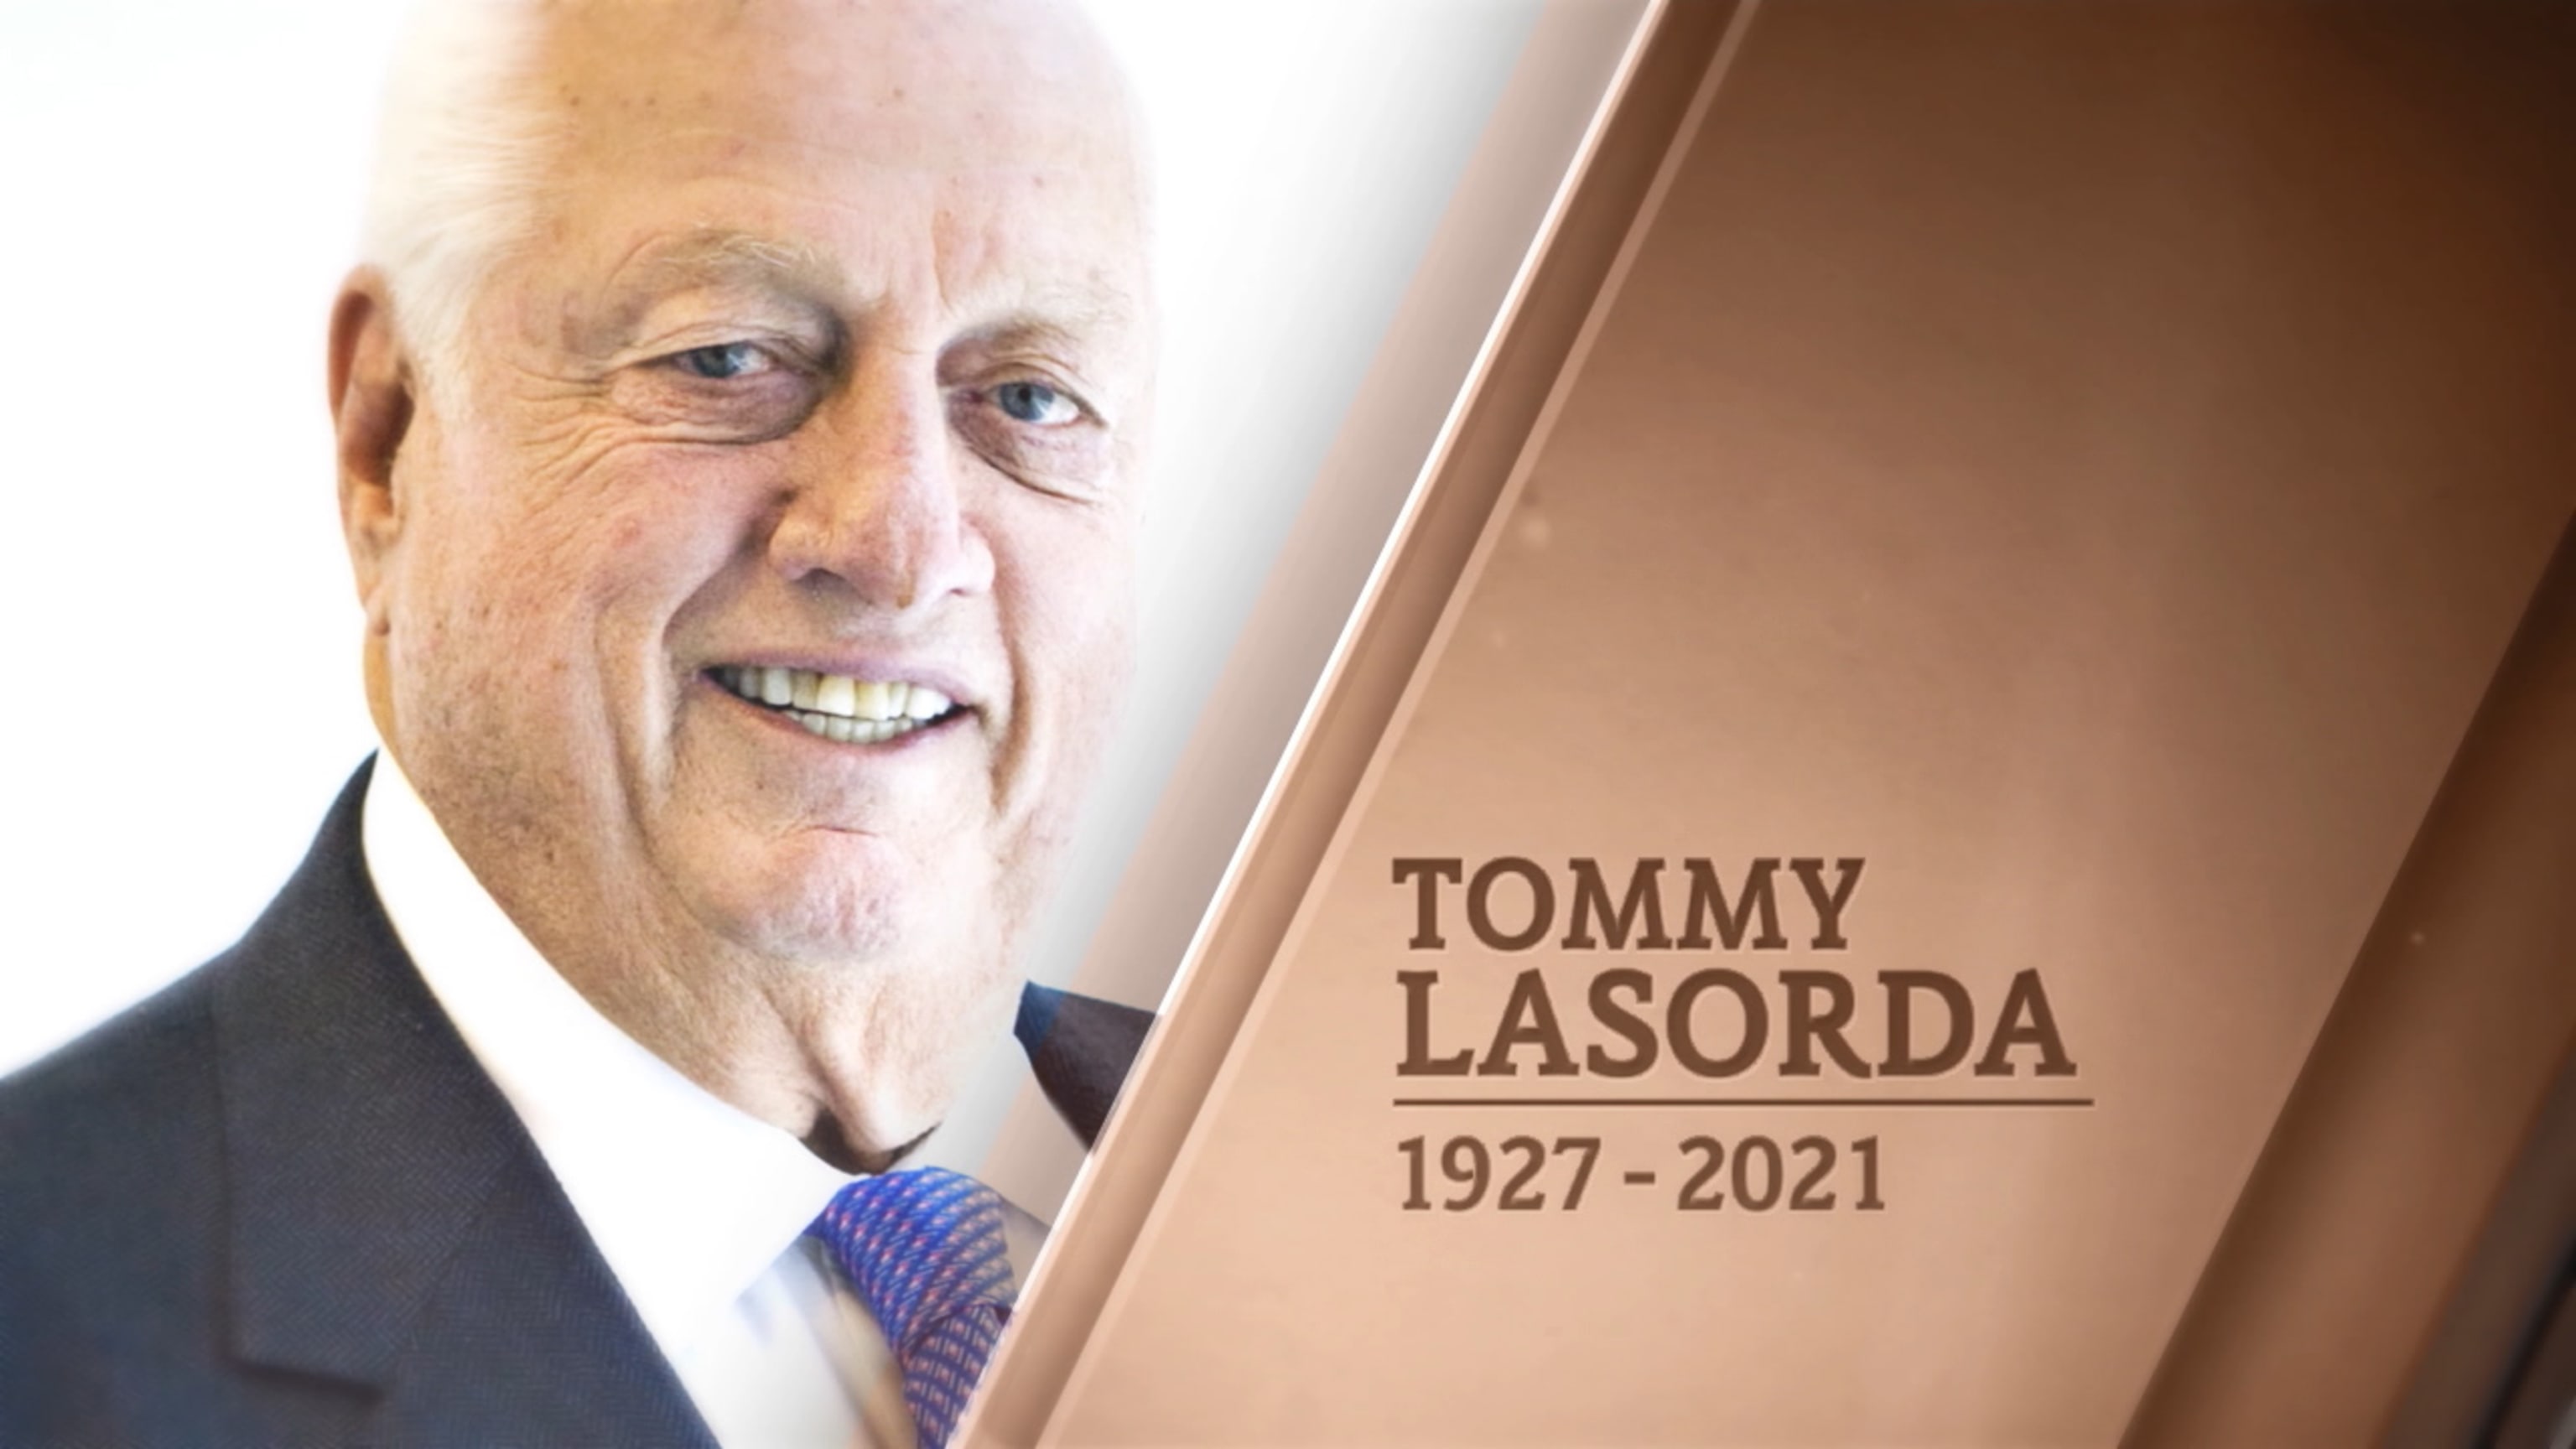 Tommy Lasorda's most memorable career moments